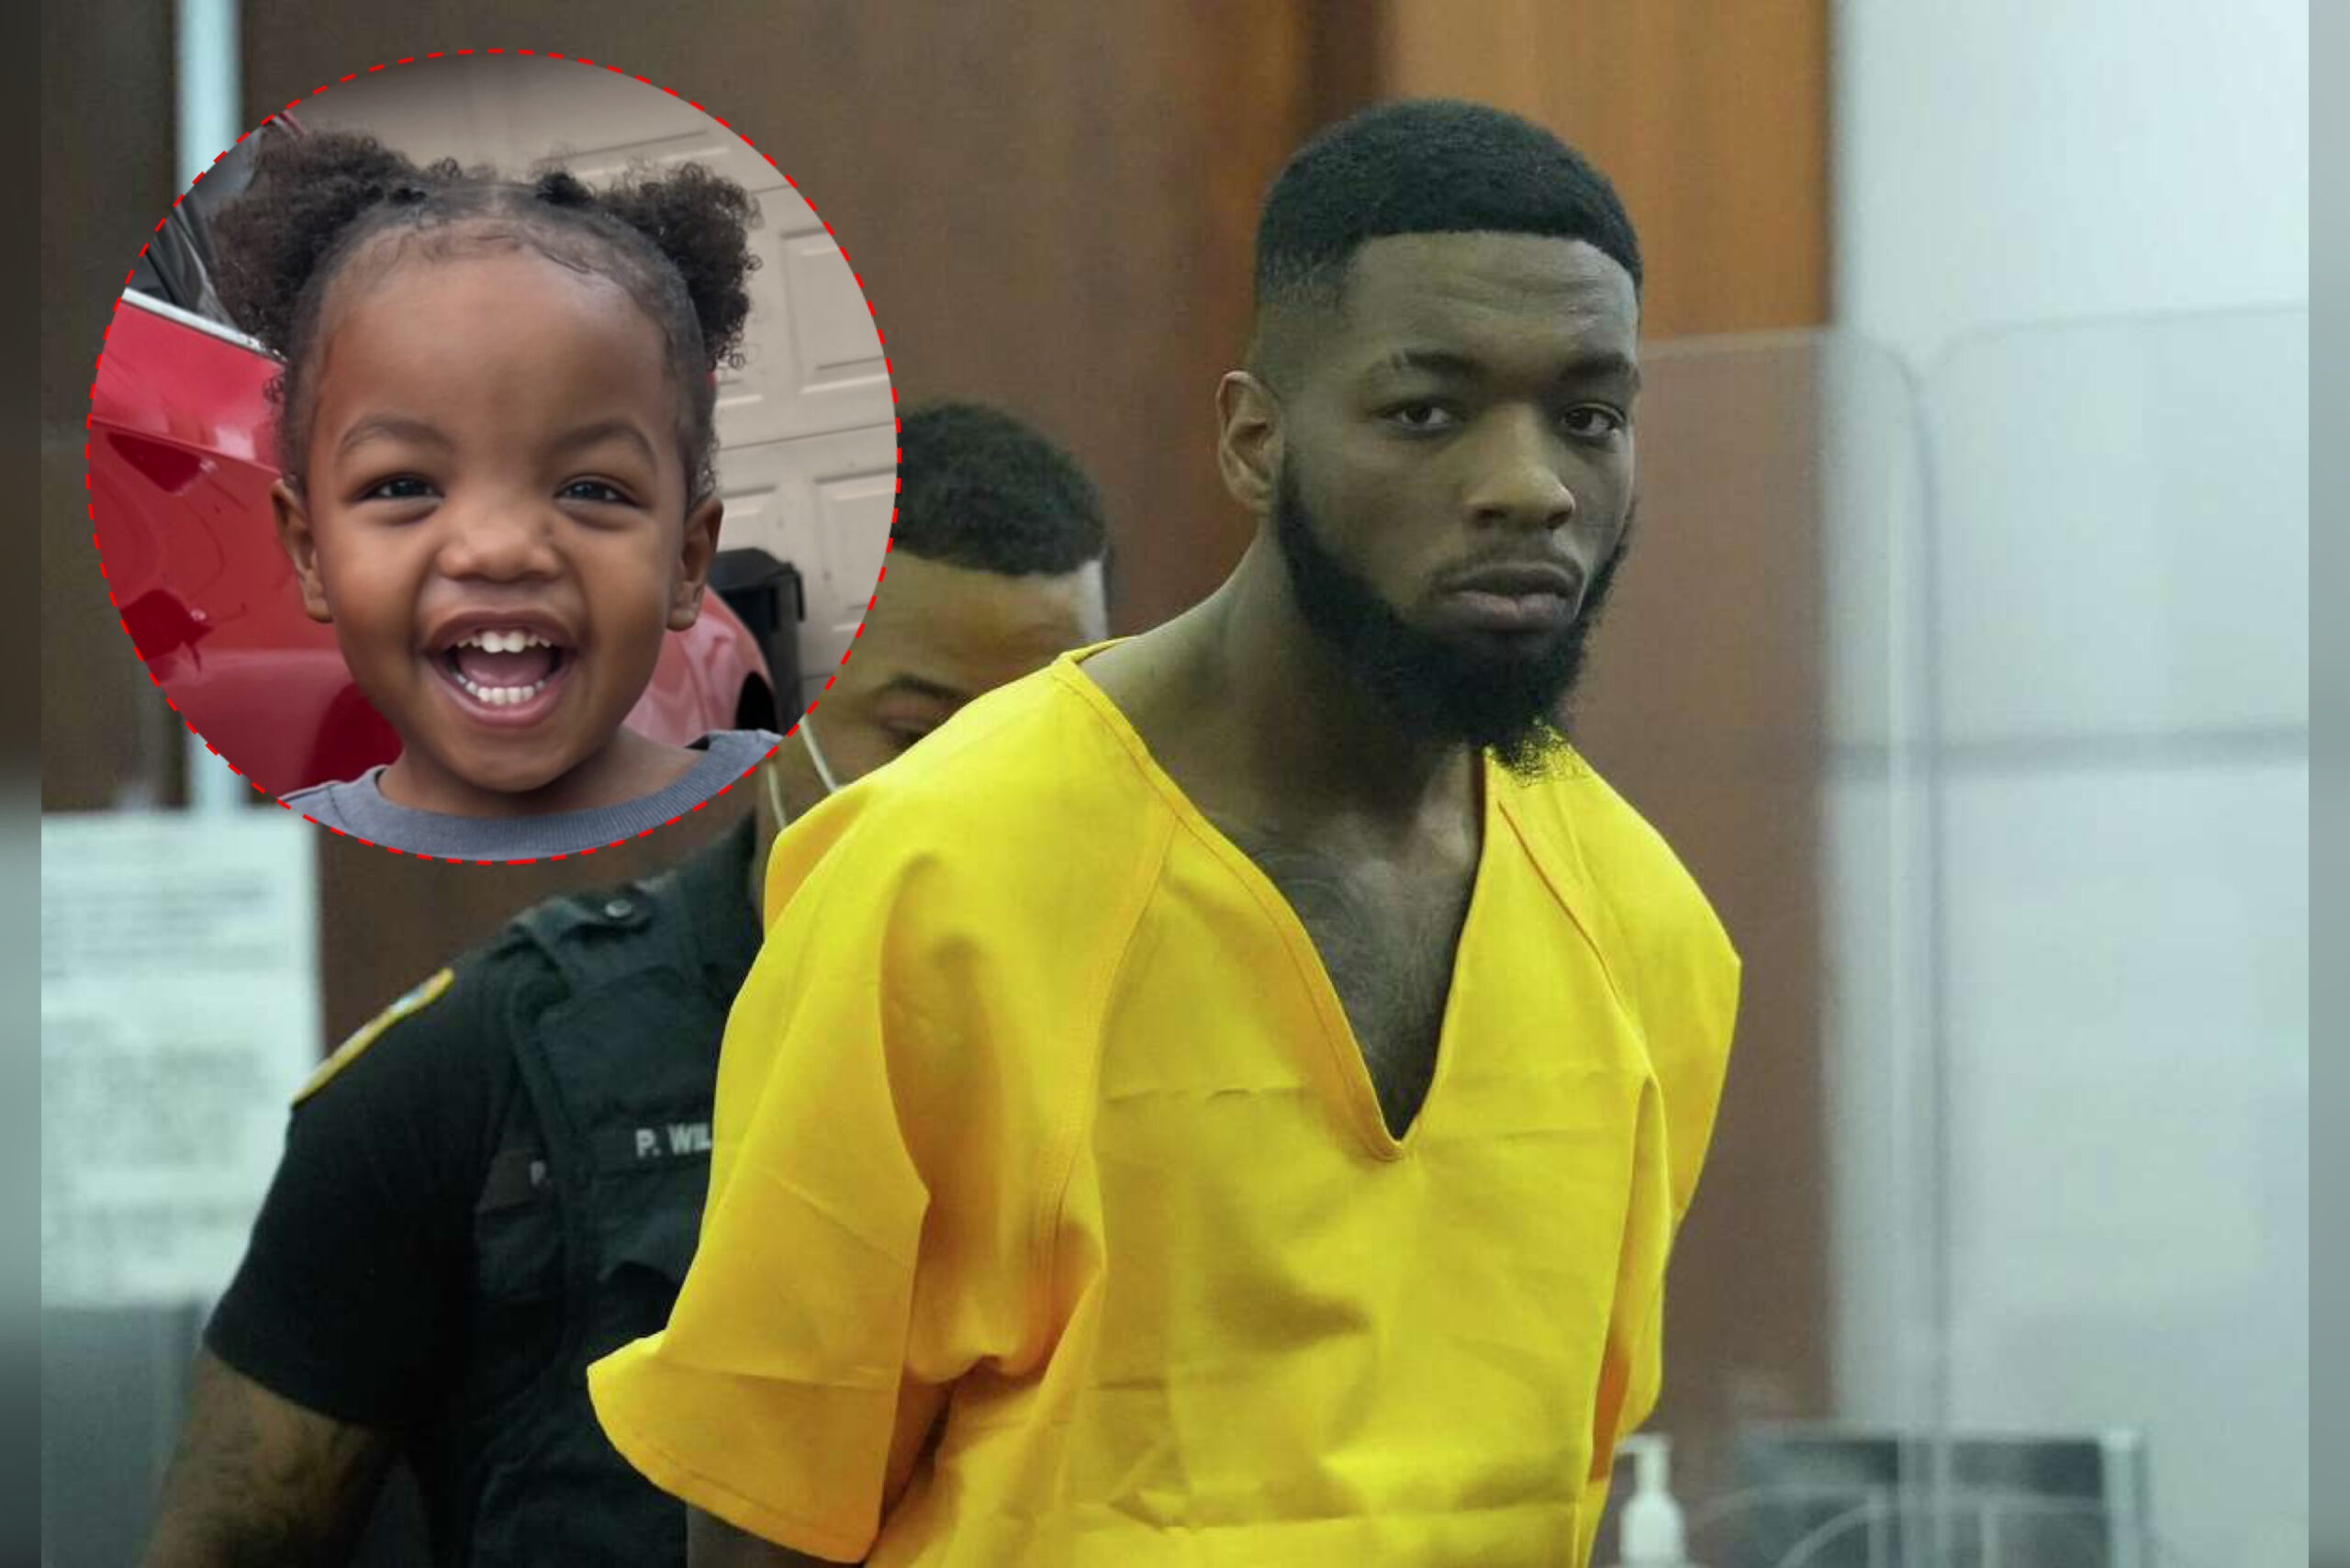 Houston Man Given $2 Million Bond After Killing His Daughter While Her Mother Watched On FaceTime